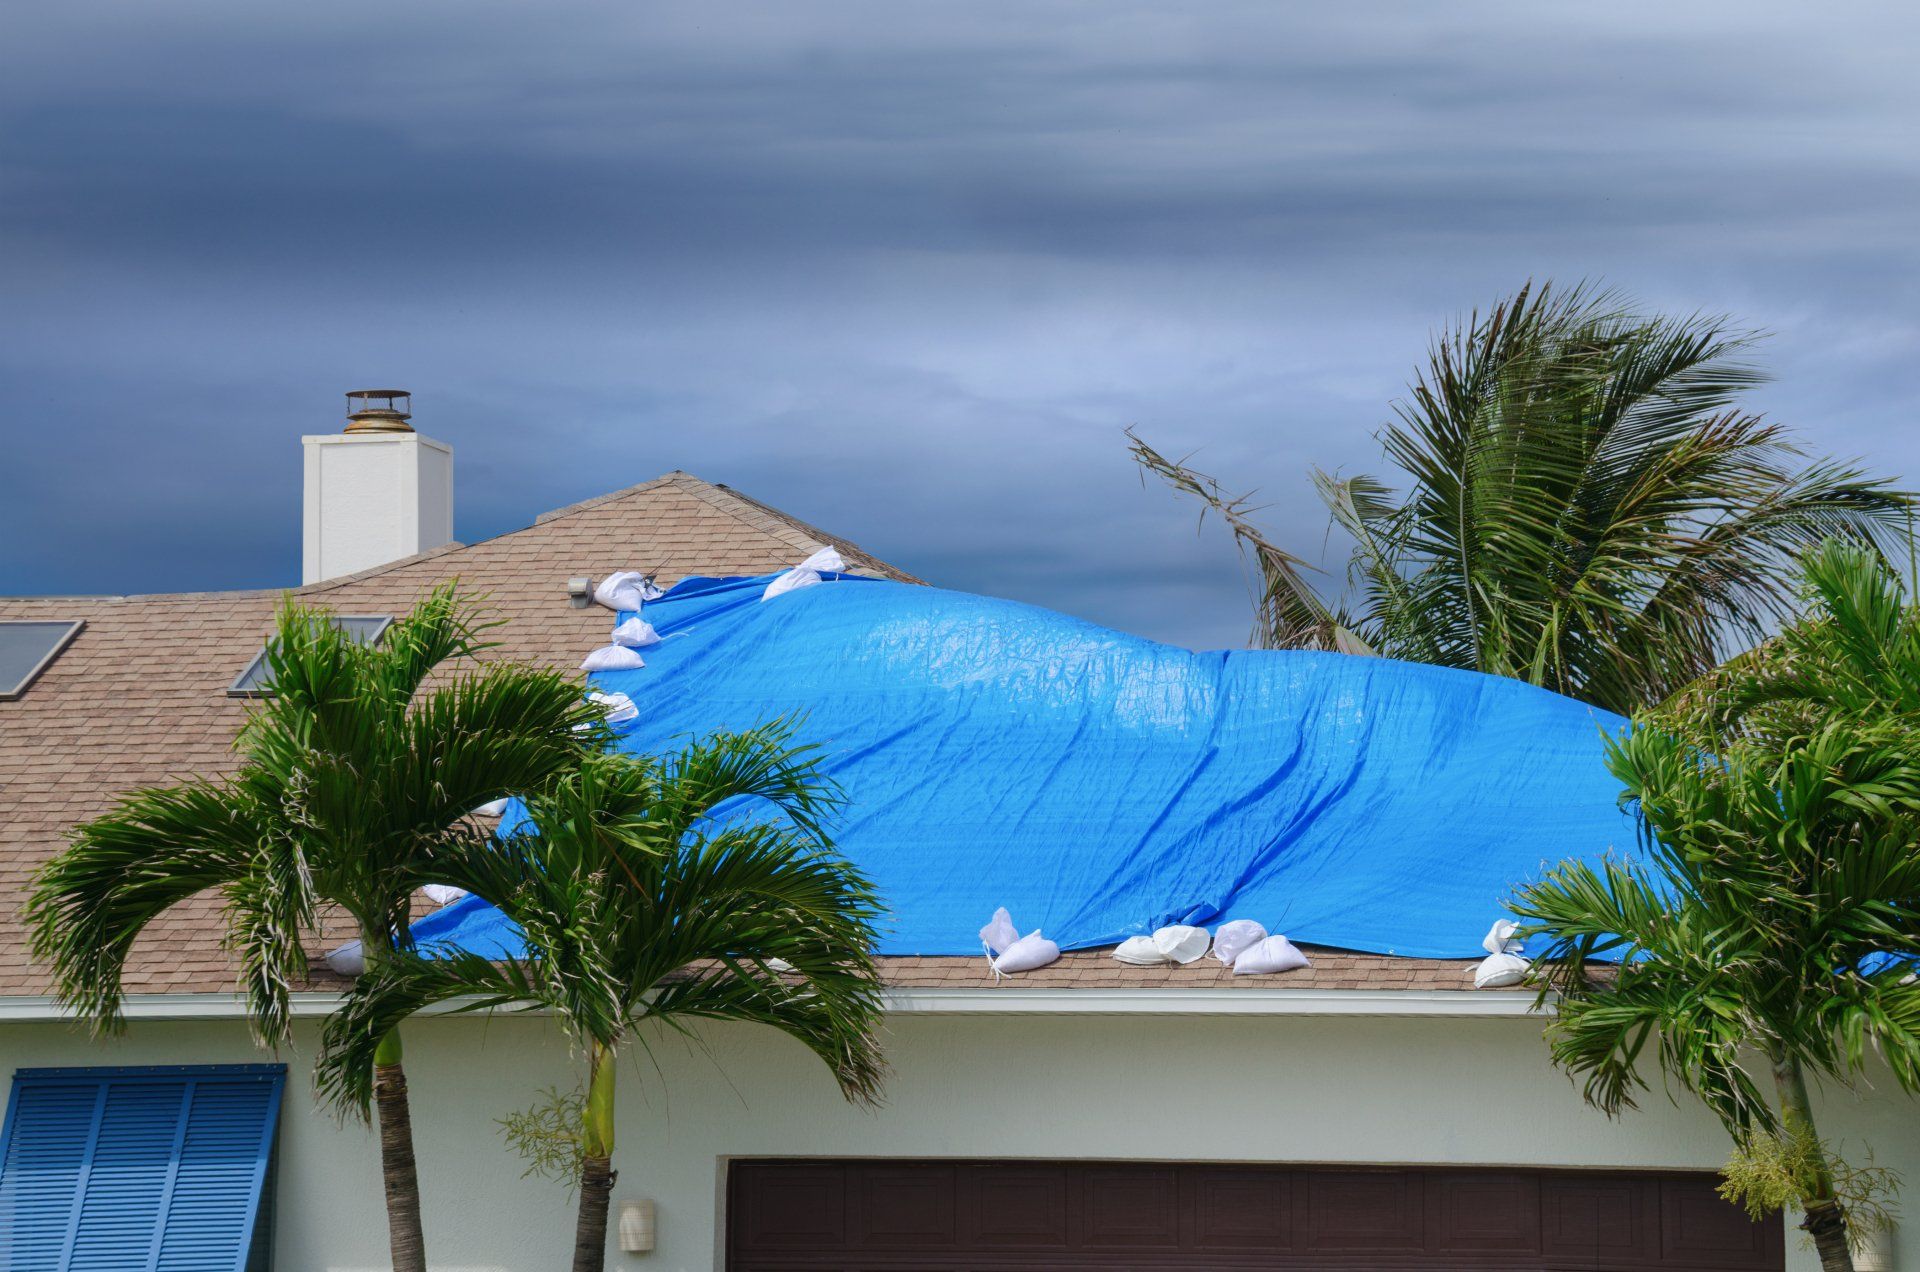 Roof of home damaged by a hurricane